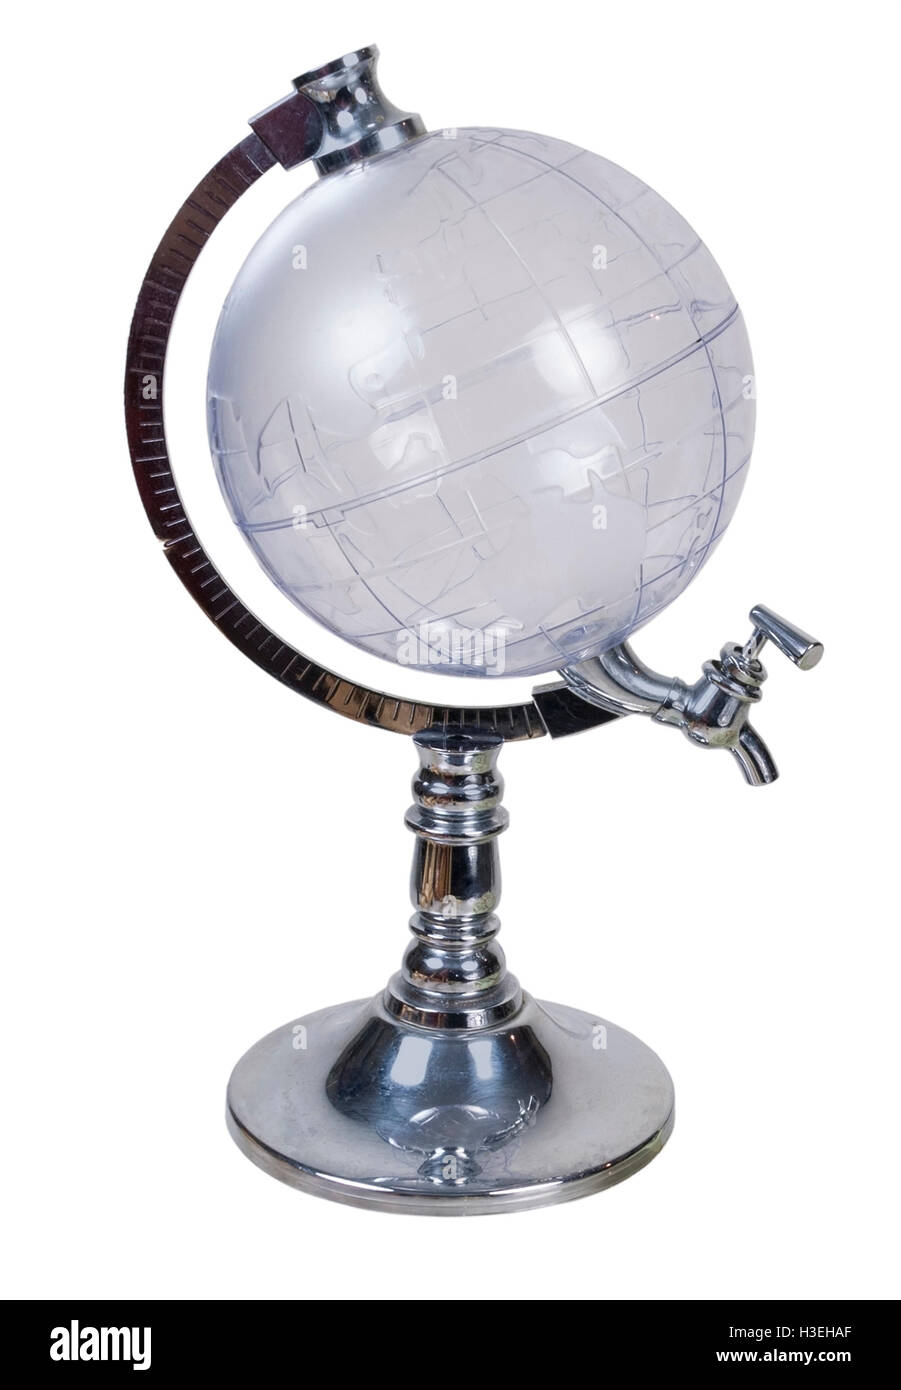 Globe liquid dispenser with faucet handle - path included Stock Photo